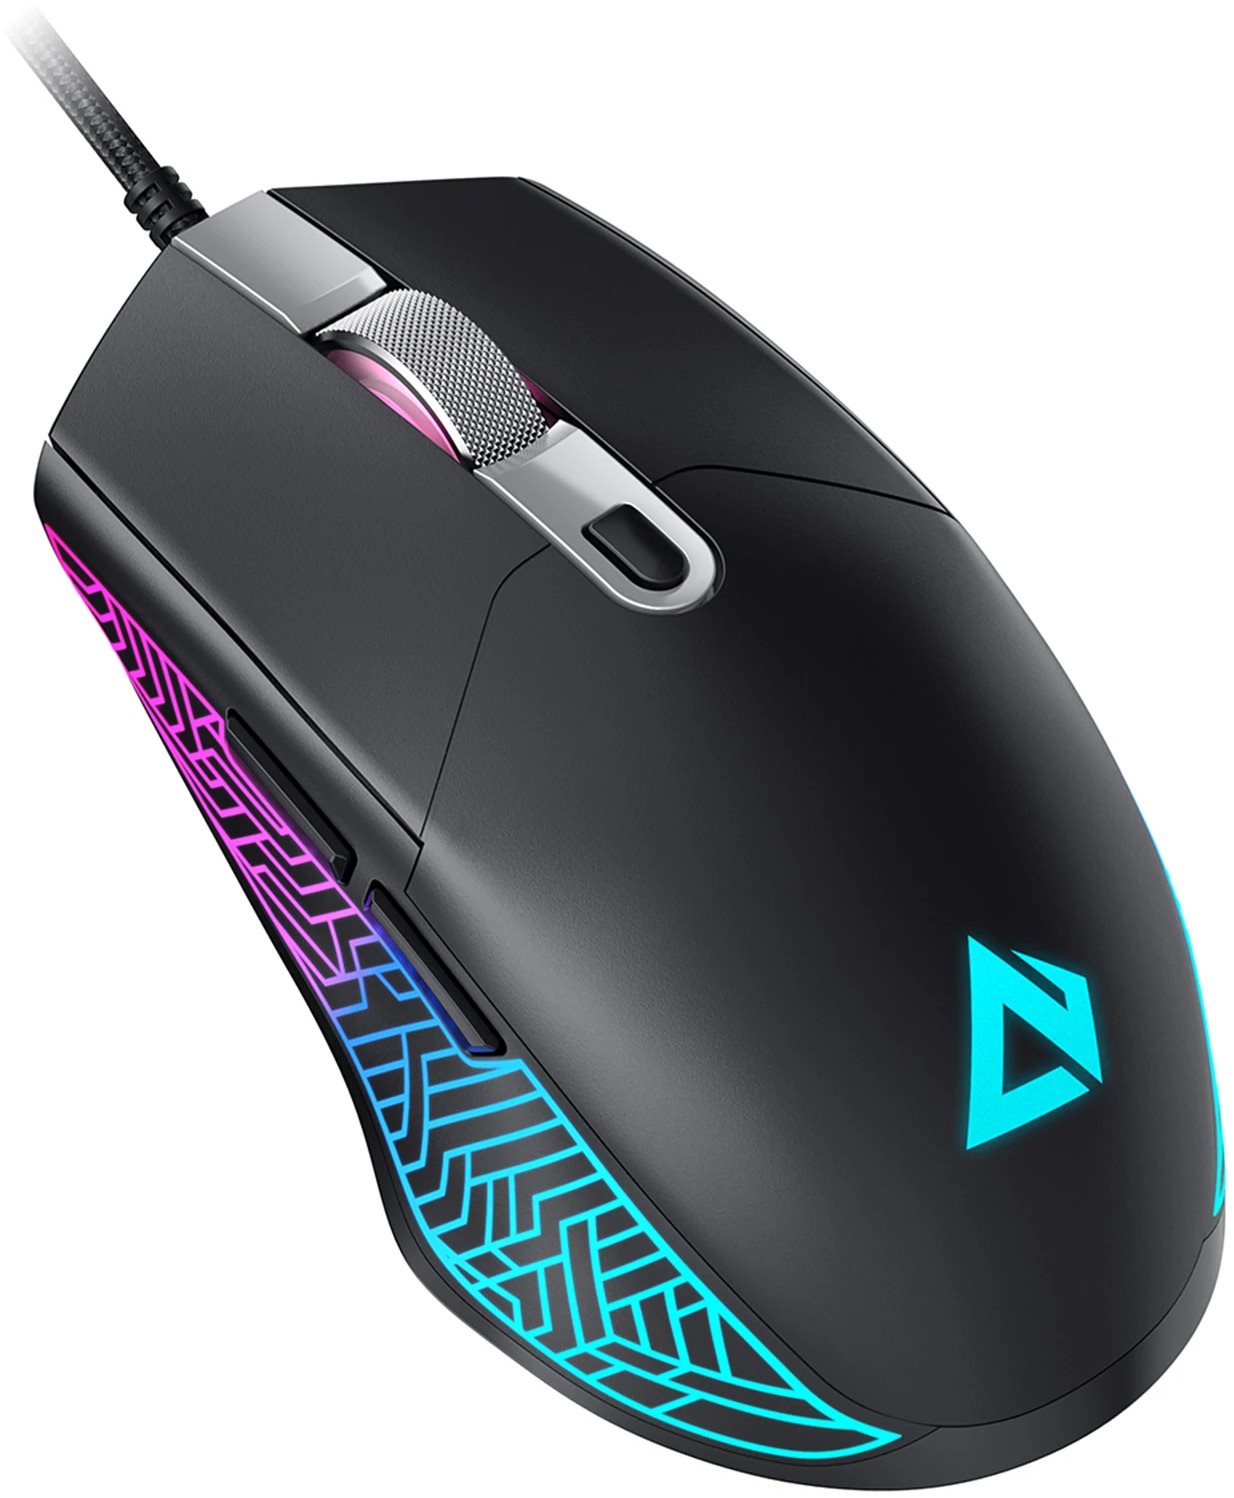 Gamer egér Aukey RGB Wired Gaming Mouse